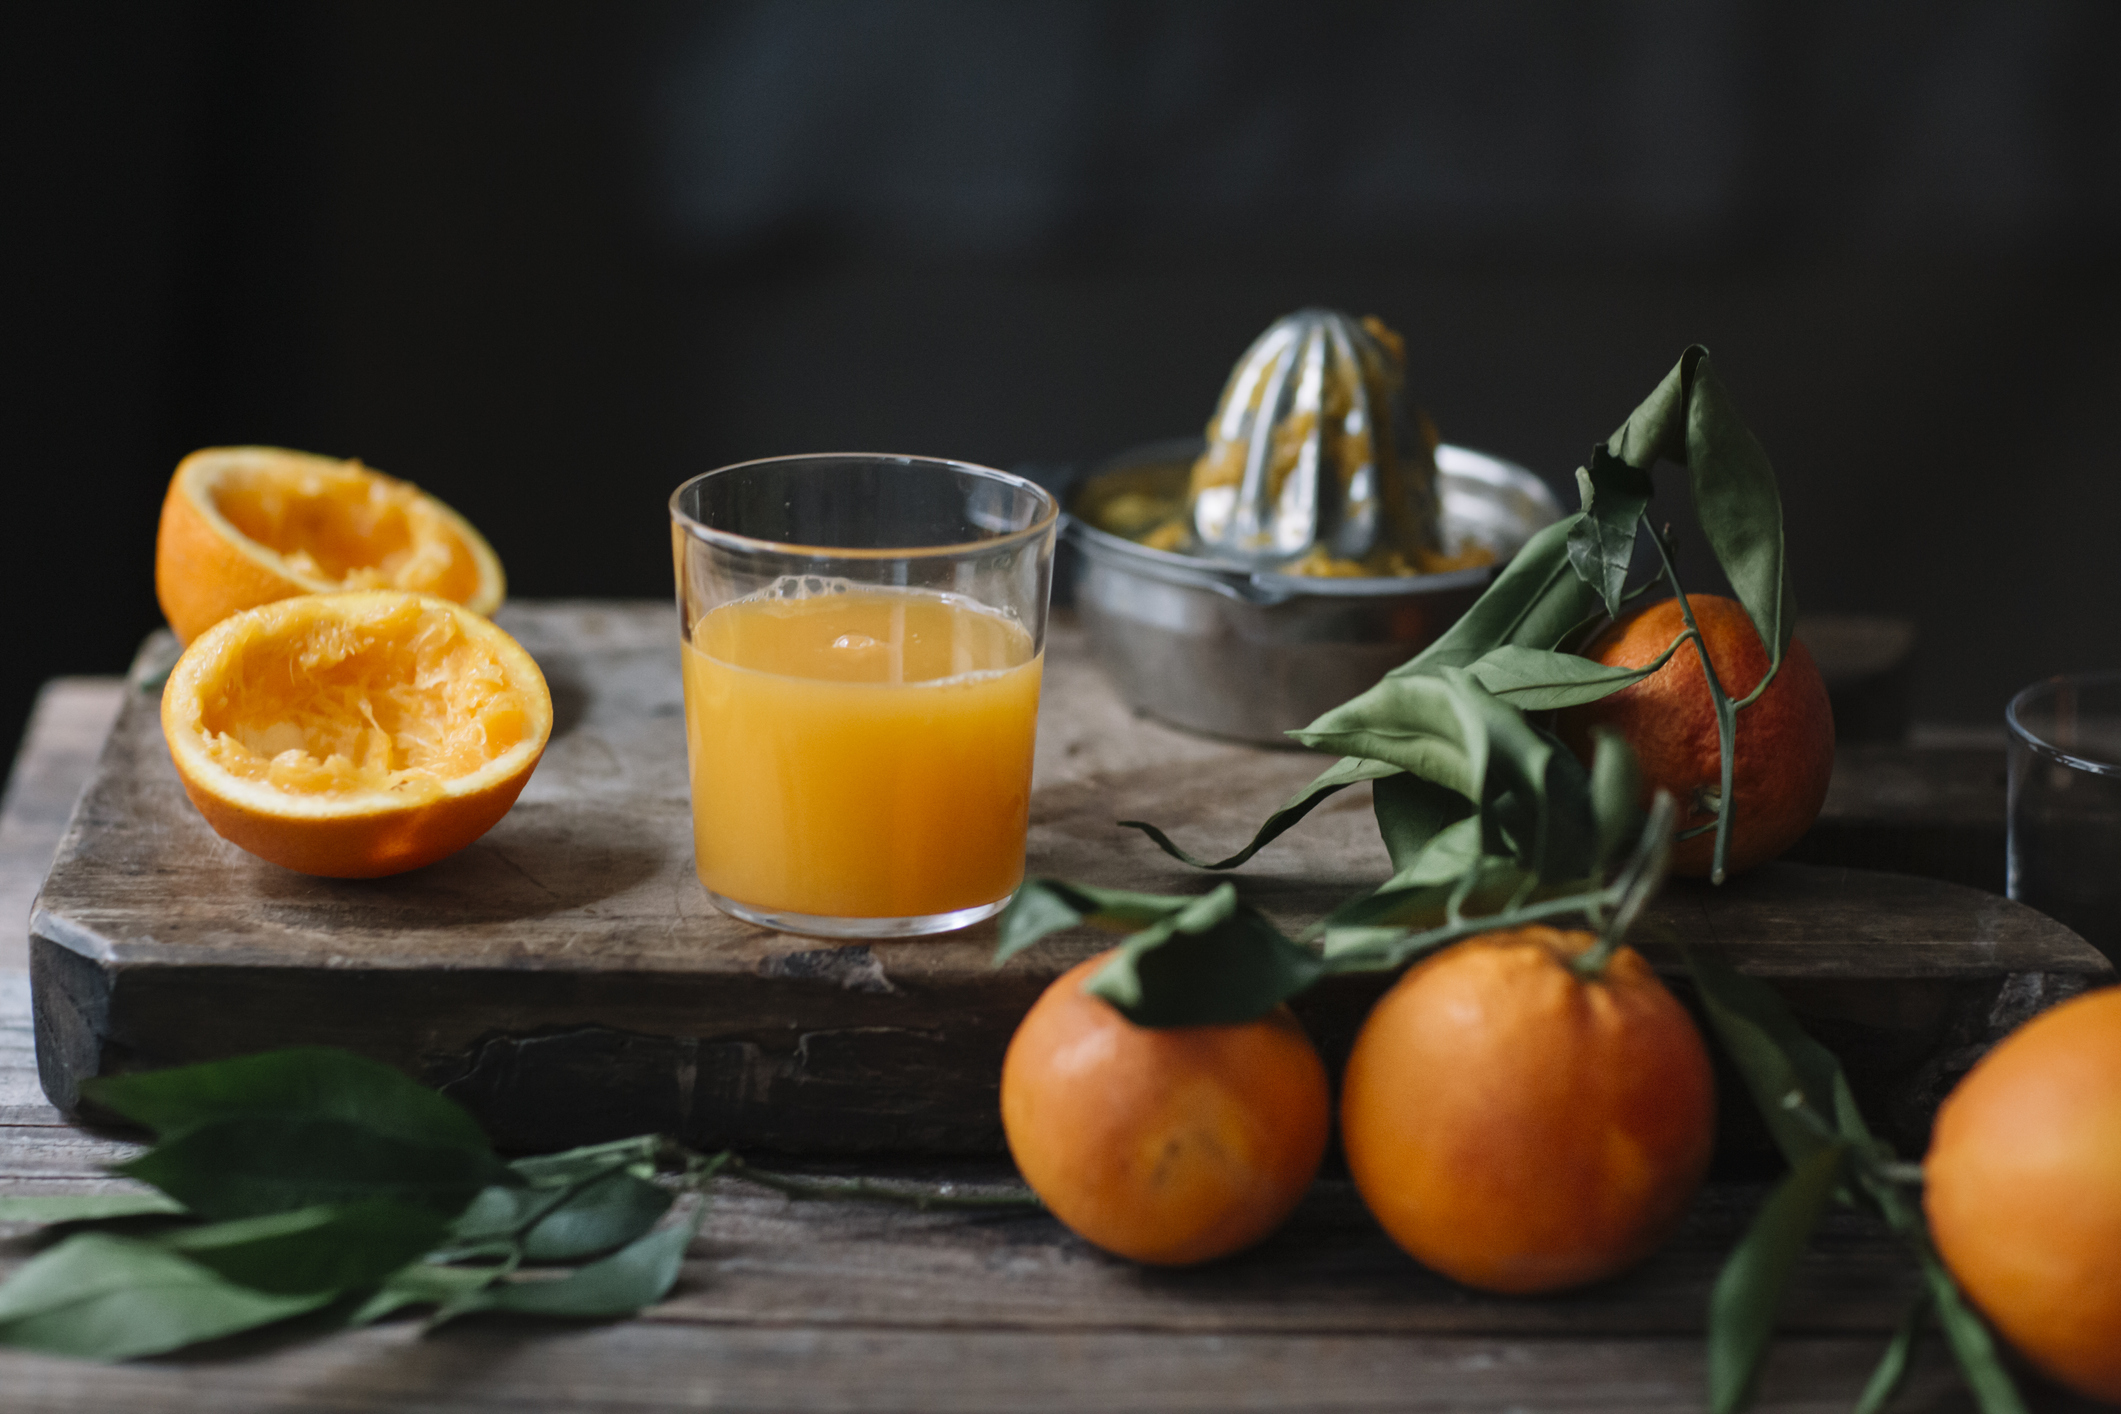 Oranges and fresh squeezed orange juice packed with vitamin C